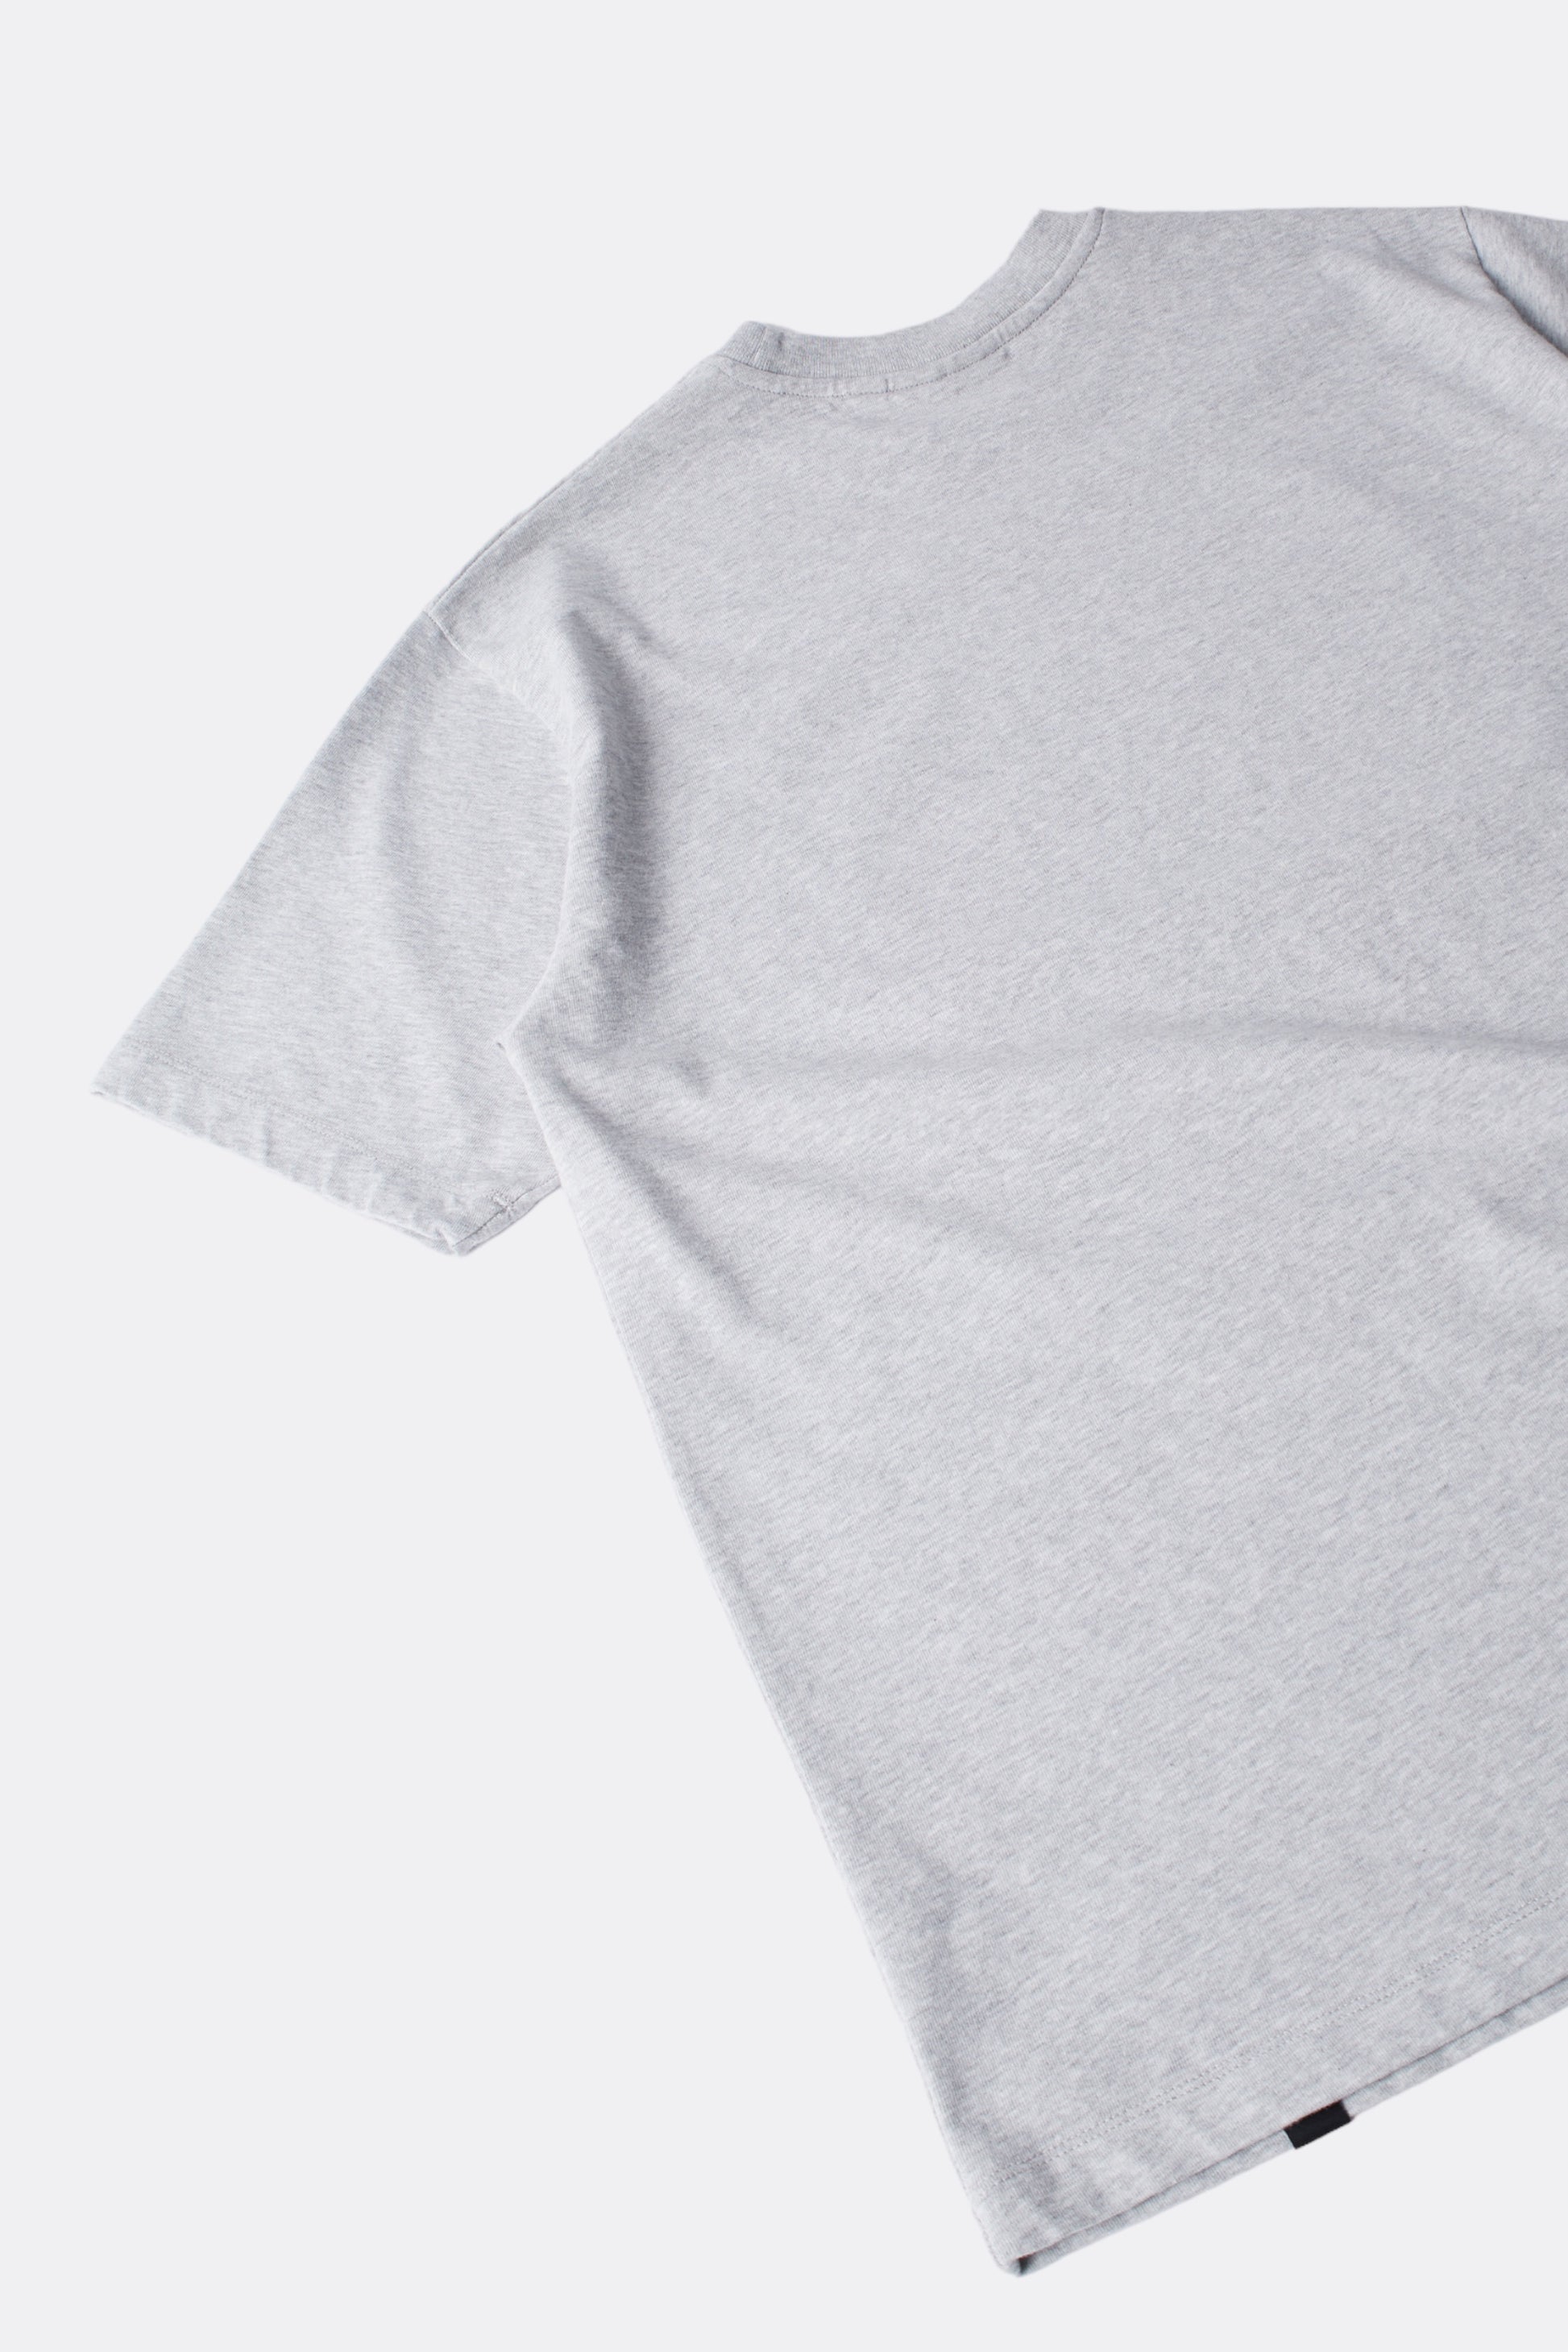 Parra - Ghost Caves T-Shirt (Heather Grey)